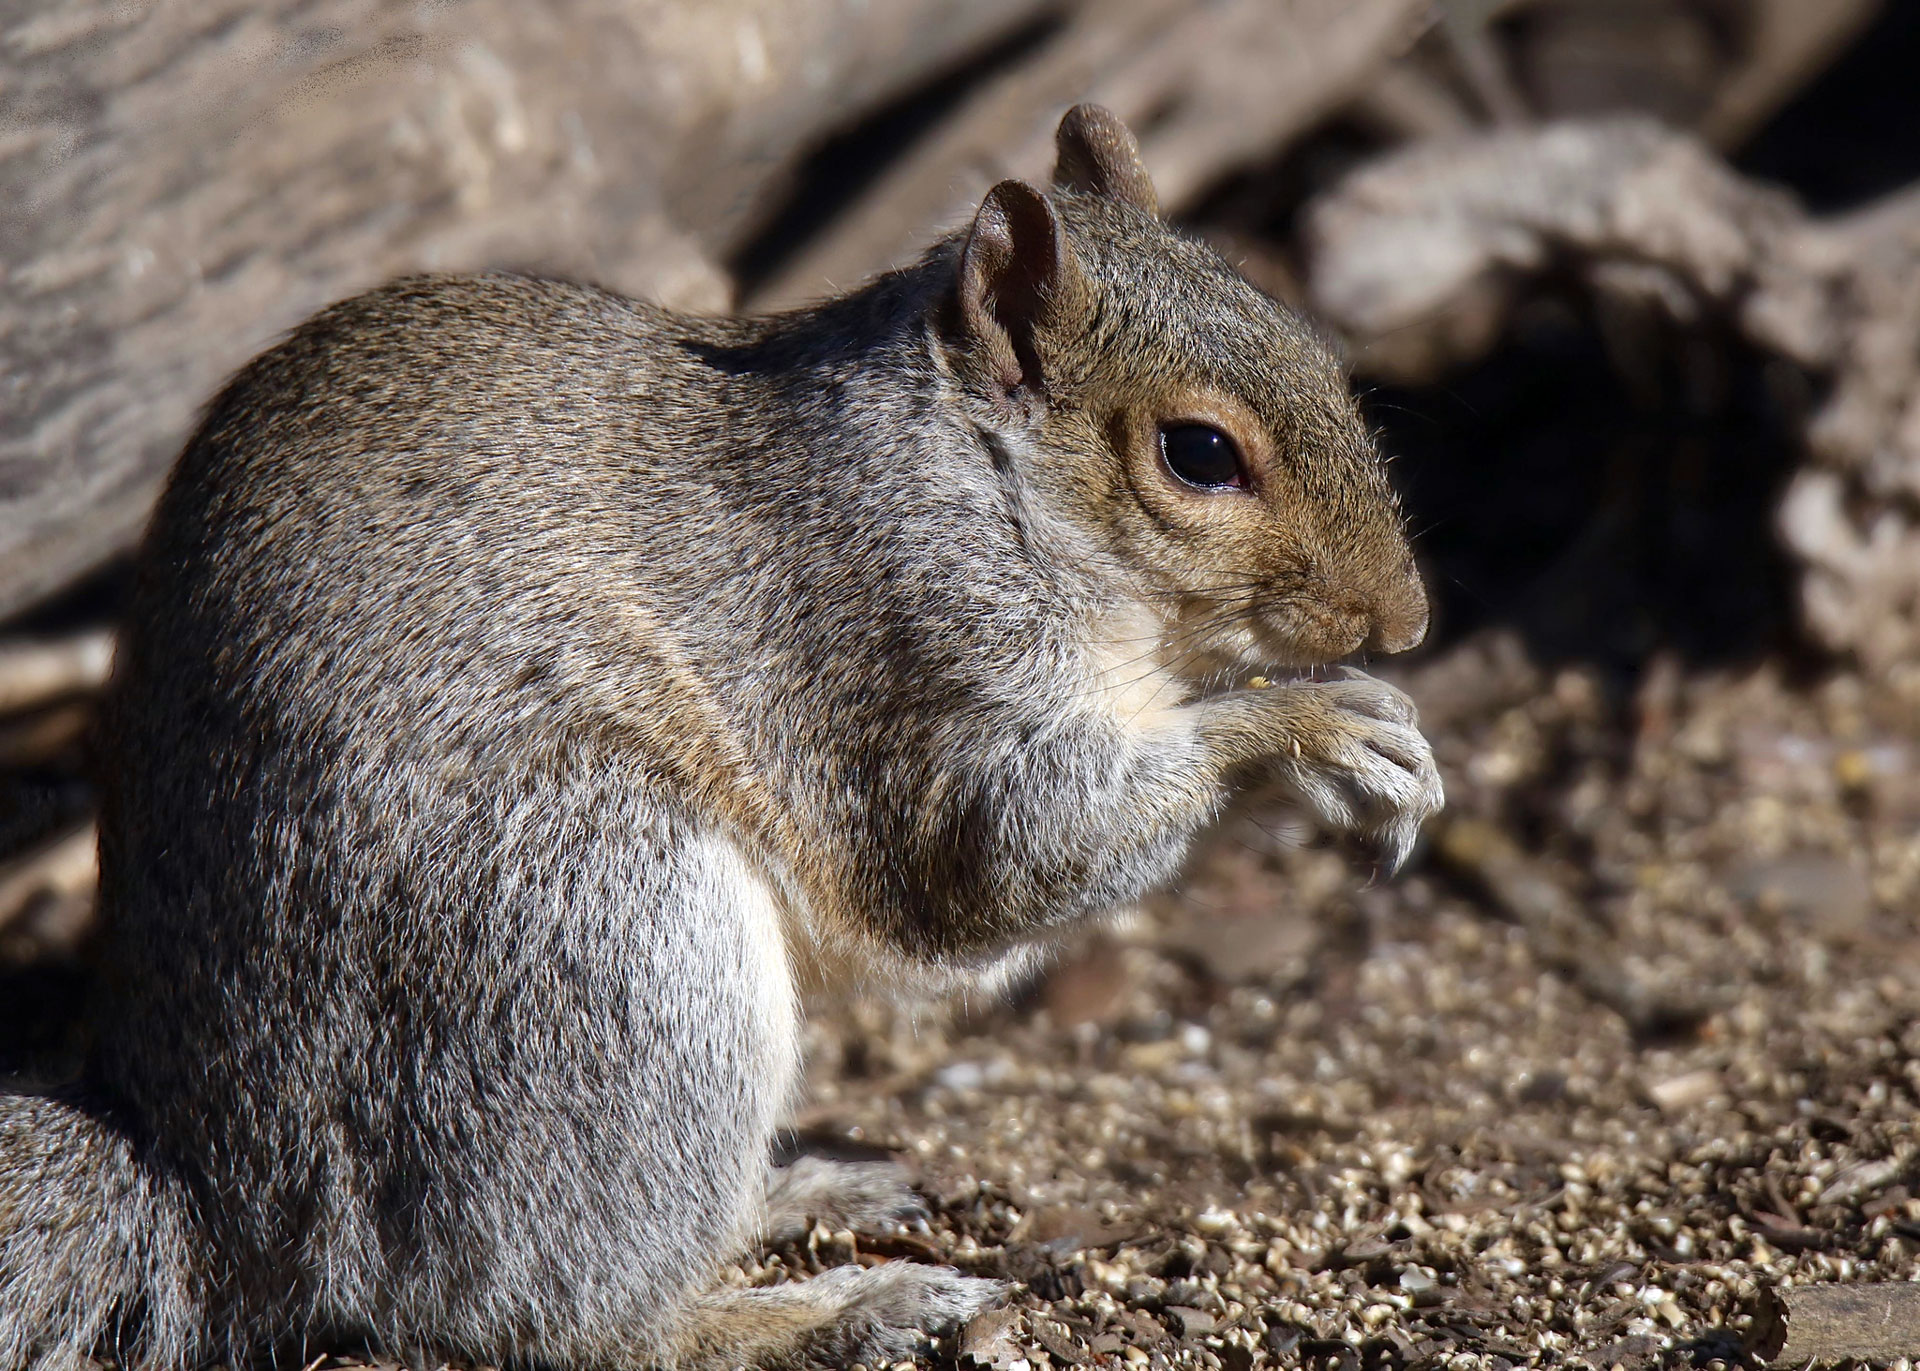 A chubby gray squirrel takes up the entire frame while eating a nut.